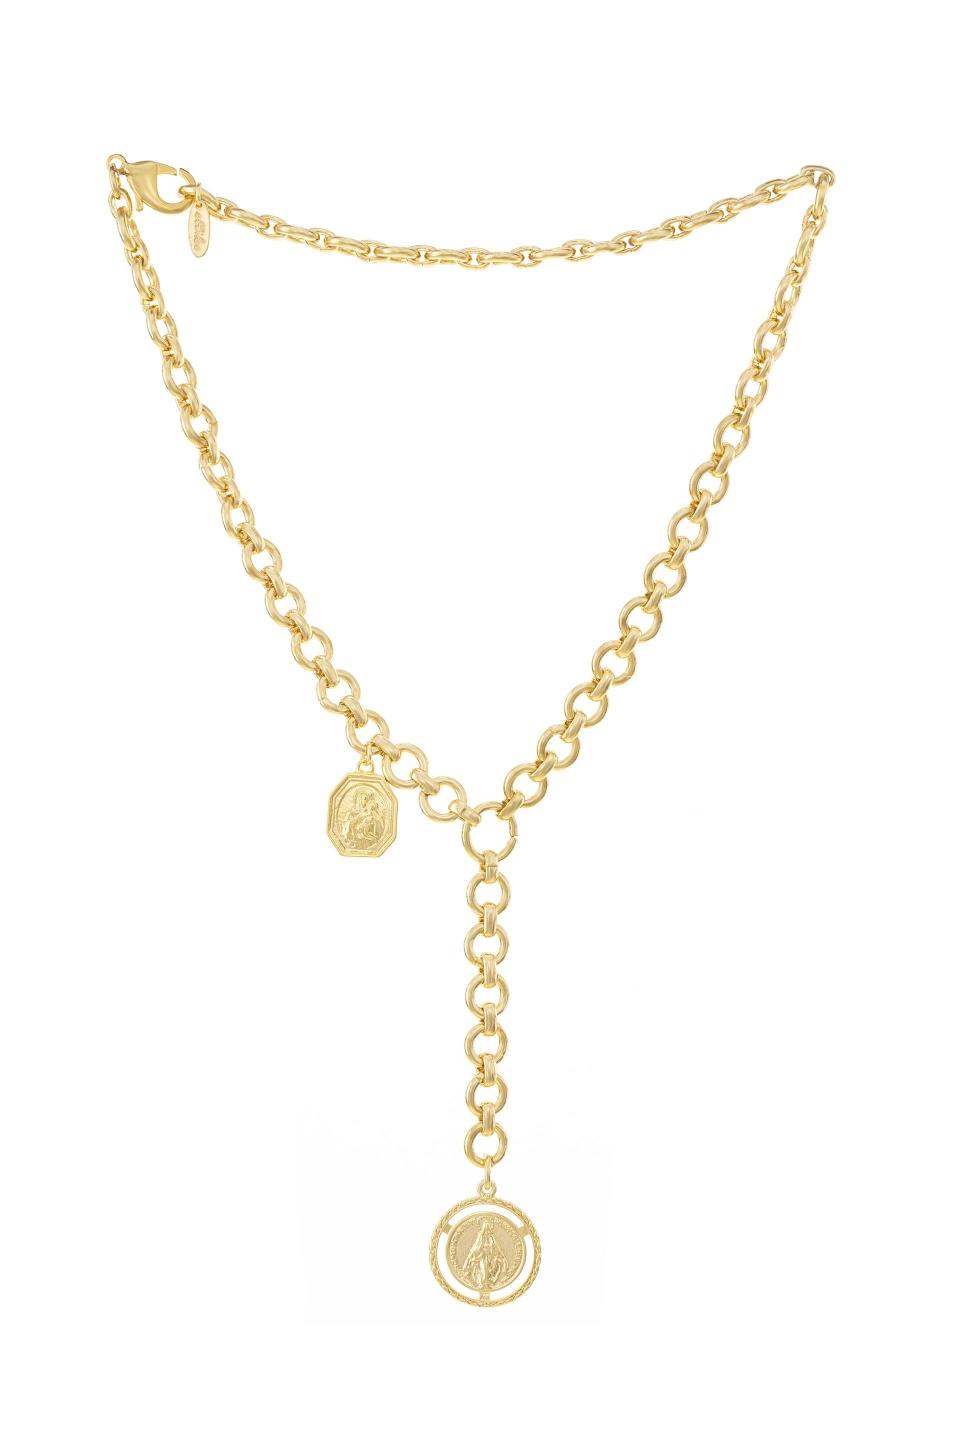 11) Find Your Way Chain Link and 18K Gold Plated Medallion Lariat